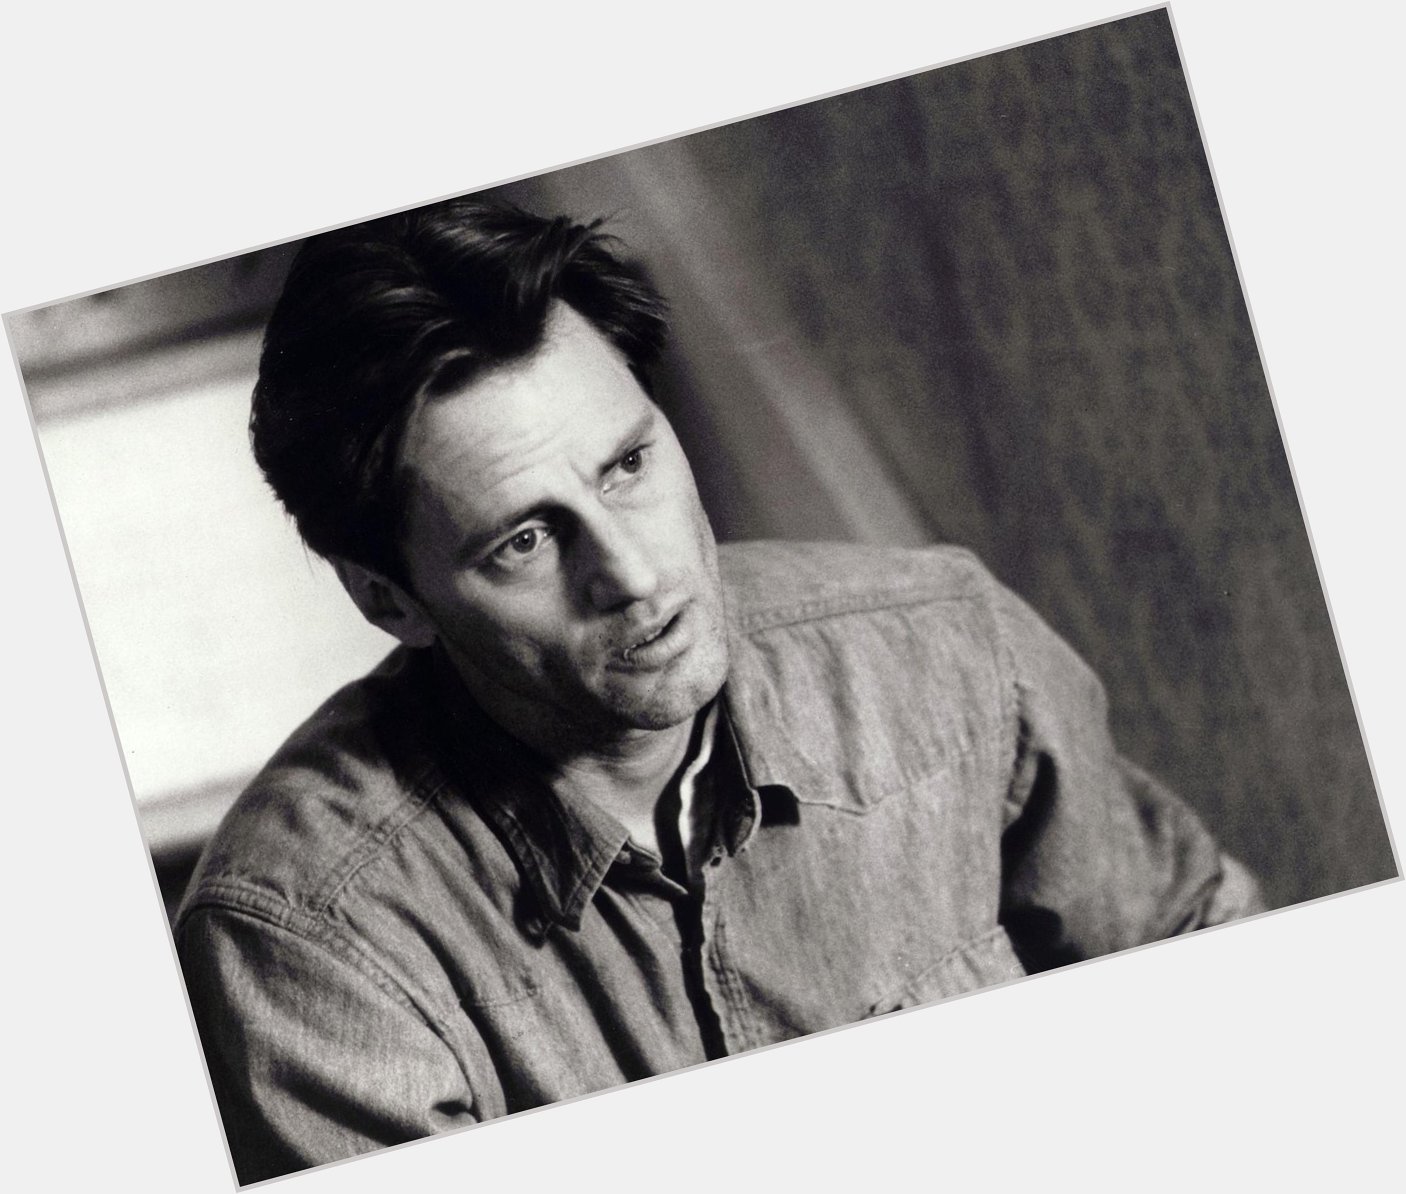 Happy birthday (RIP) to a brilliant actor and playwright, Pulitzer Prize winner Sam Shepard! 